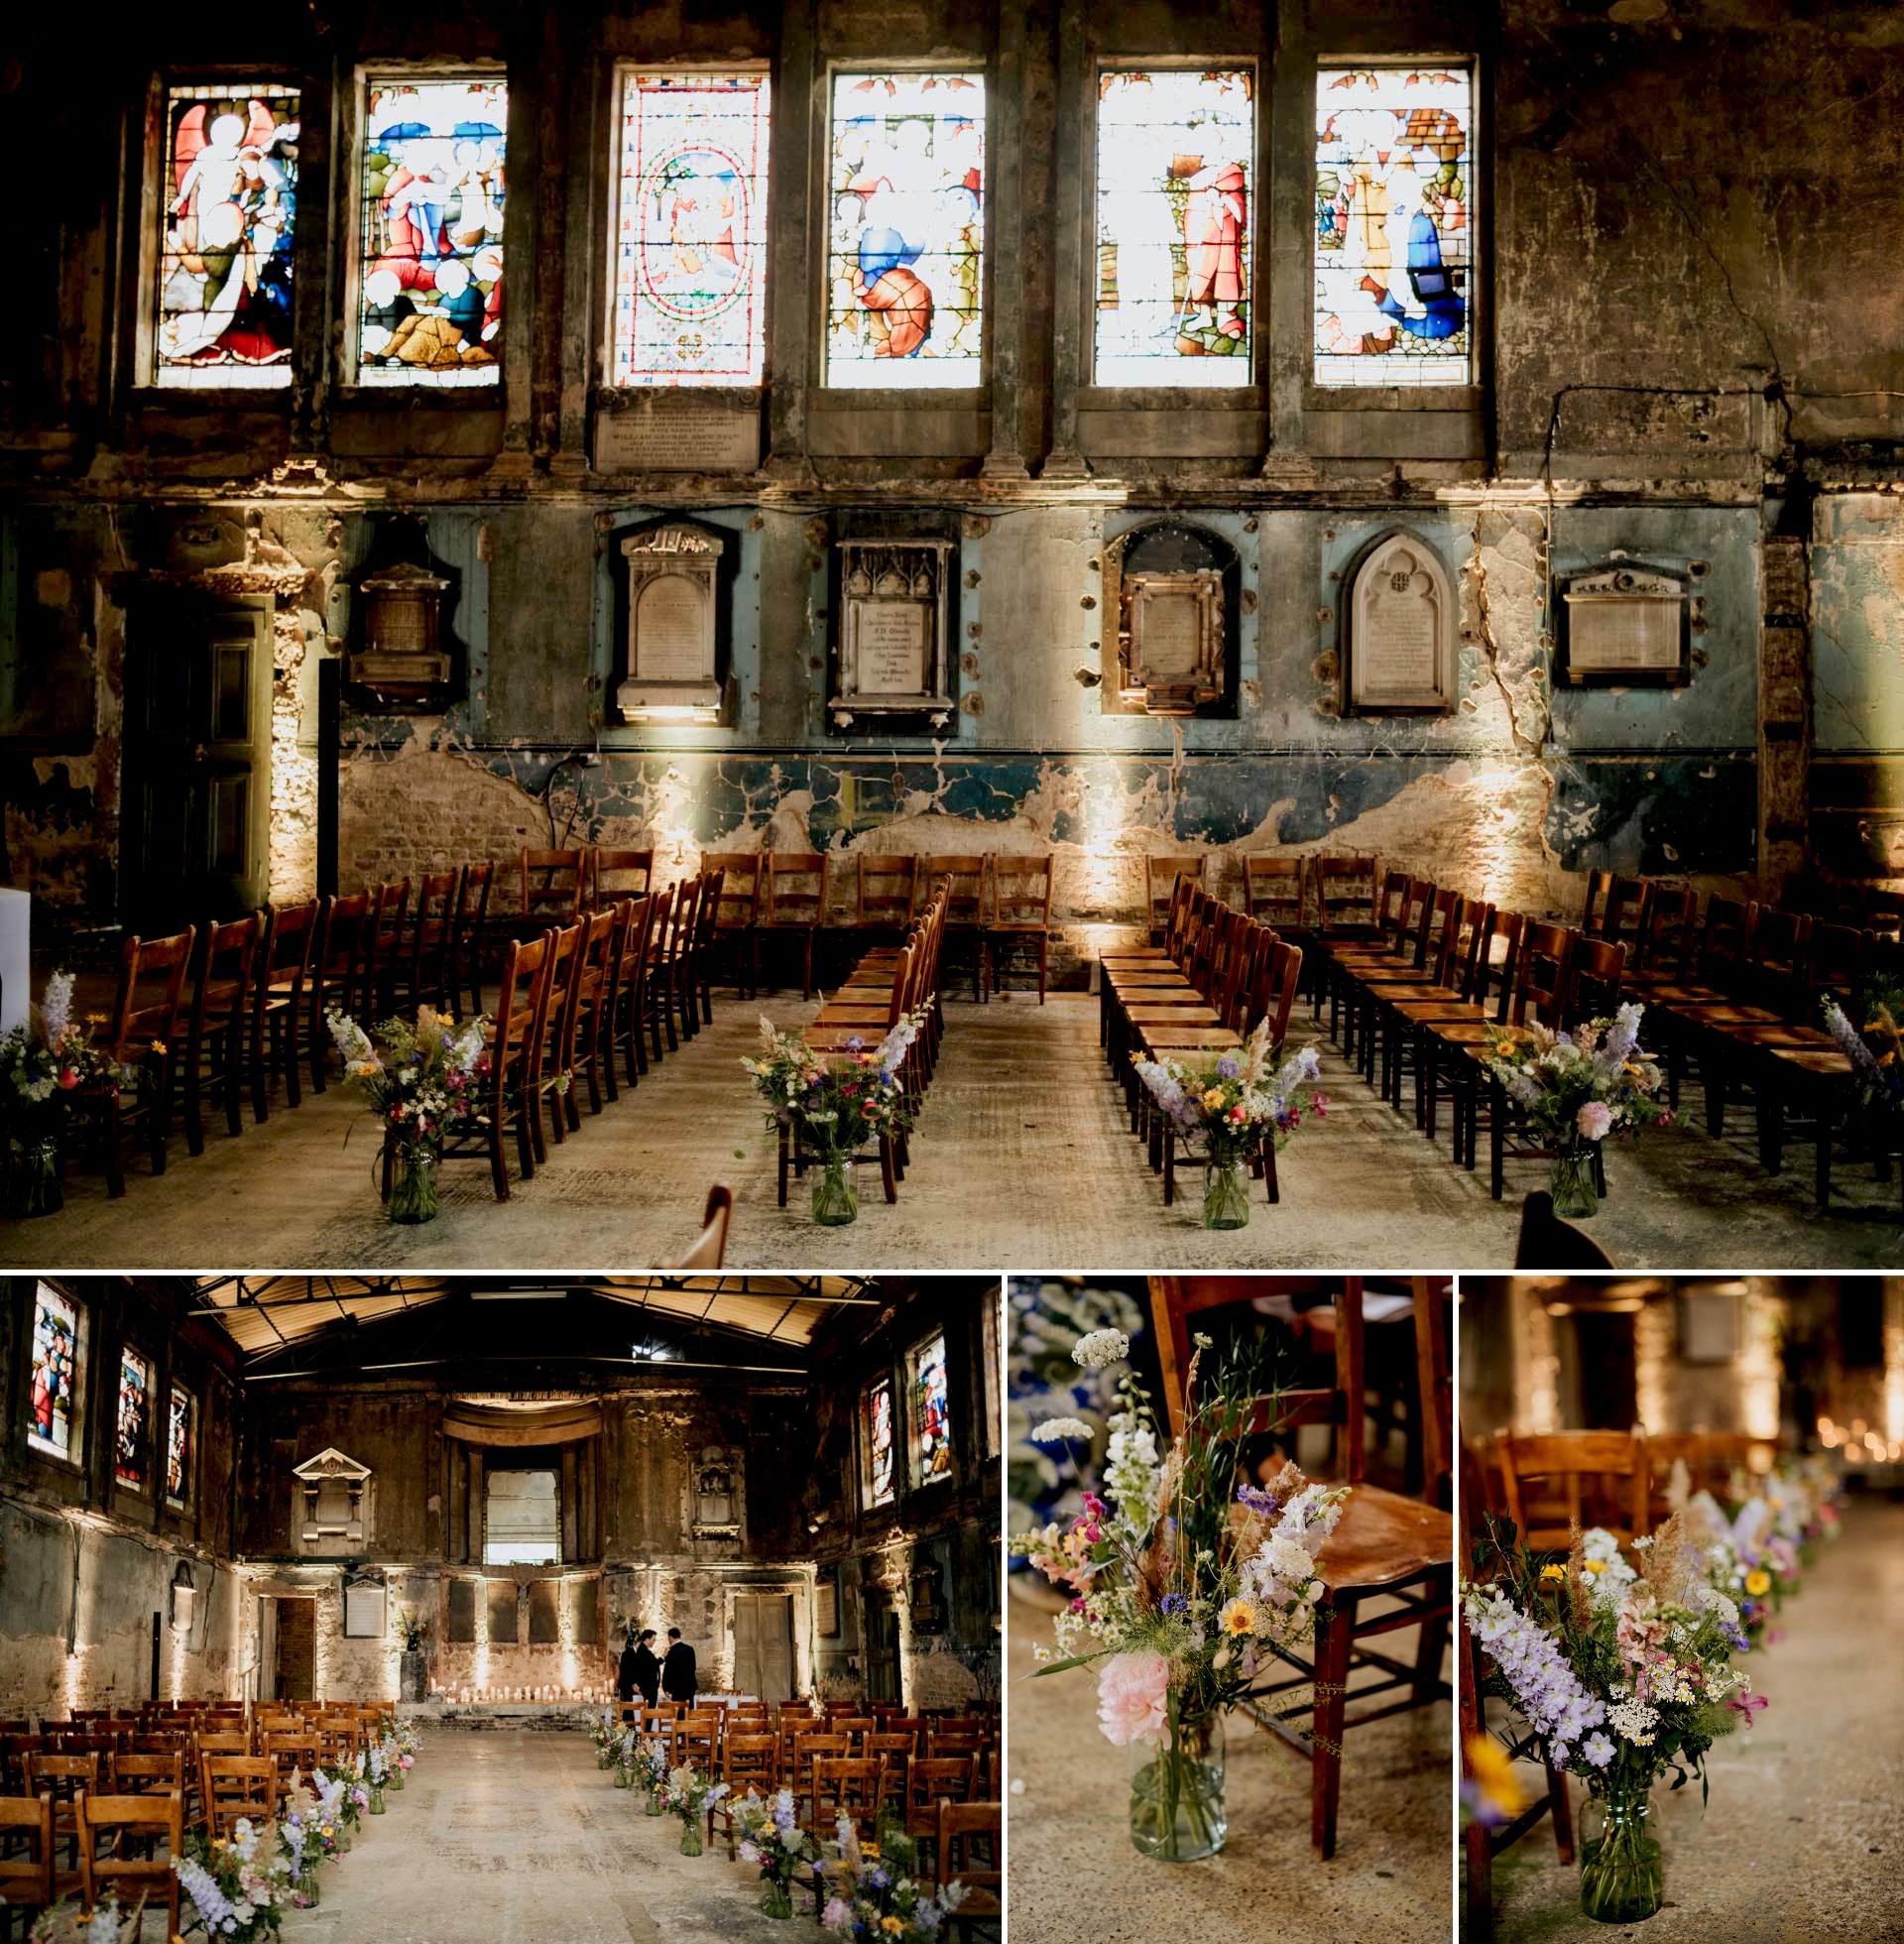 asylum chapel interiors with stained glass windows, wooden chairs and fresh cut flowers